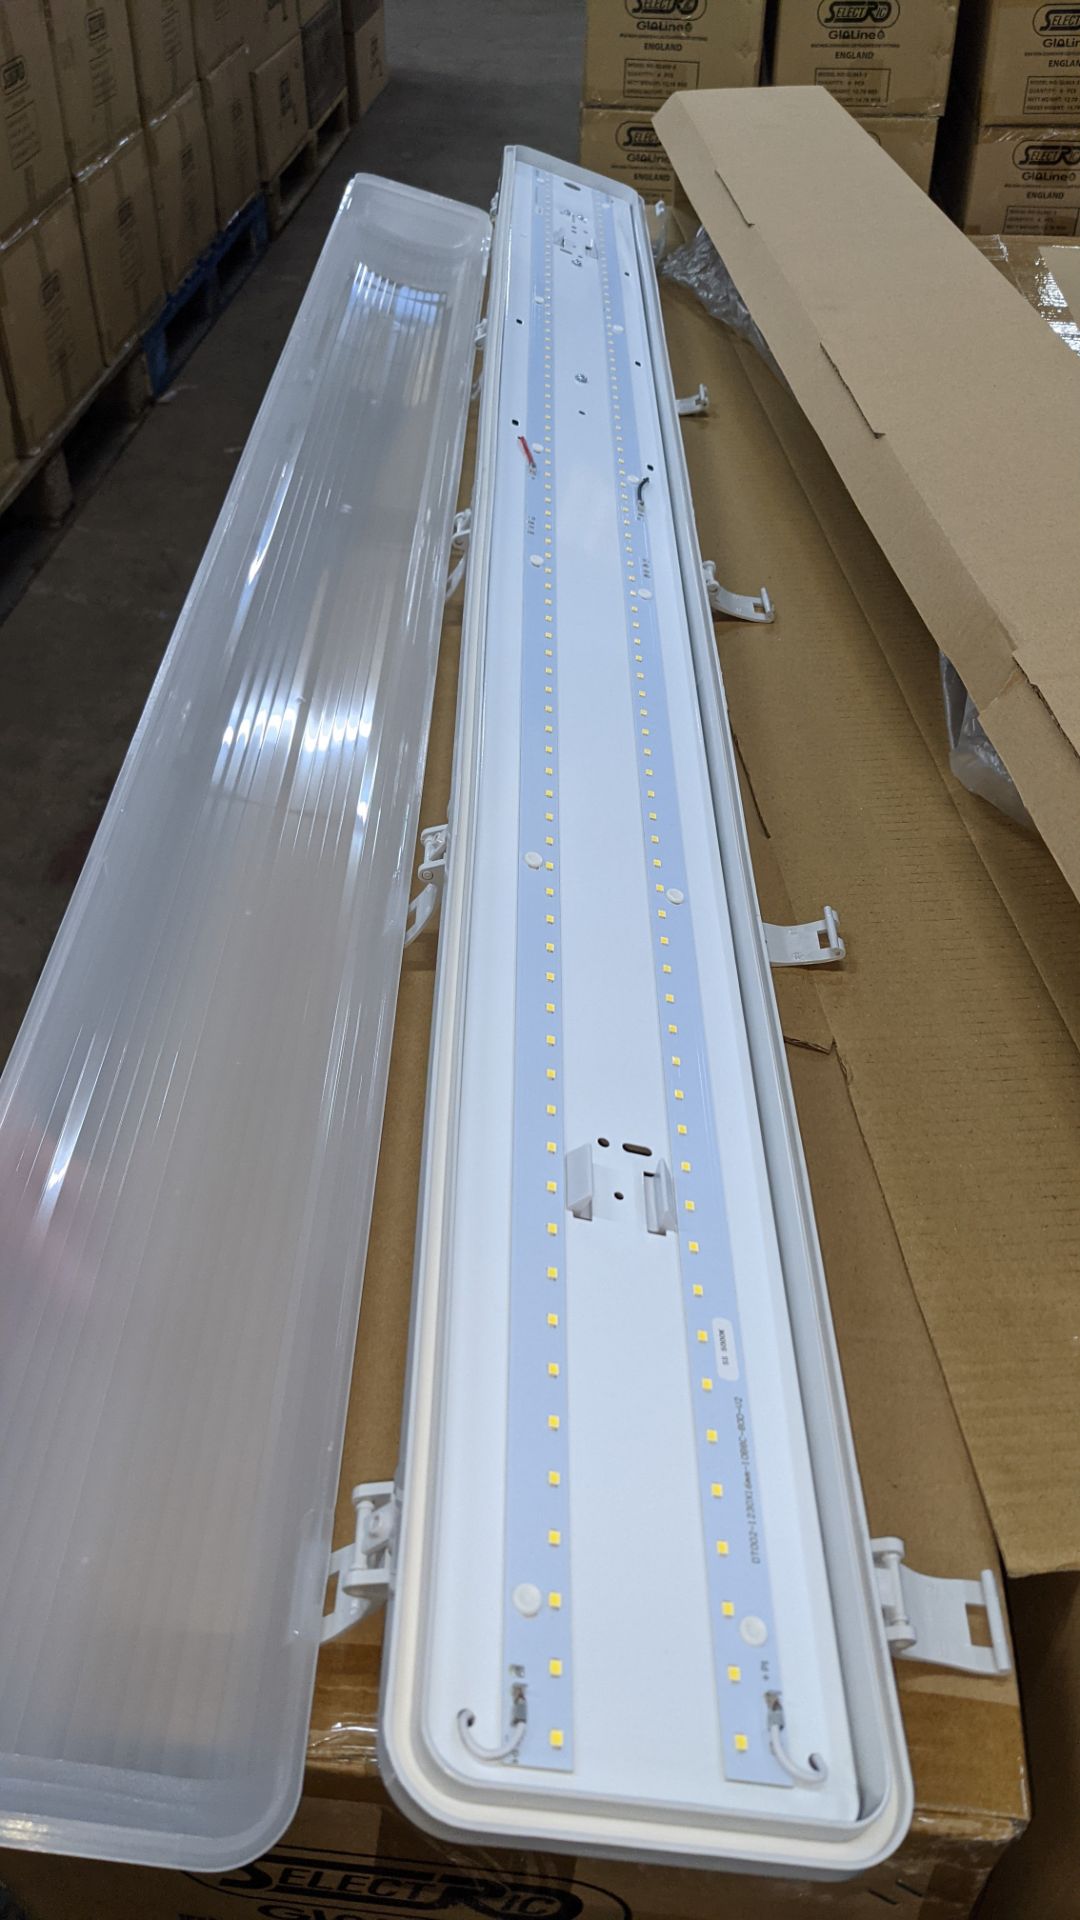 18 off IP65 non-corrosive LED fluorescent light fittings. Model GLO65-4, 4', twin LED 40W, polycarb - Image 7 of 7